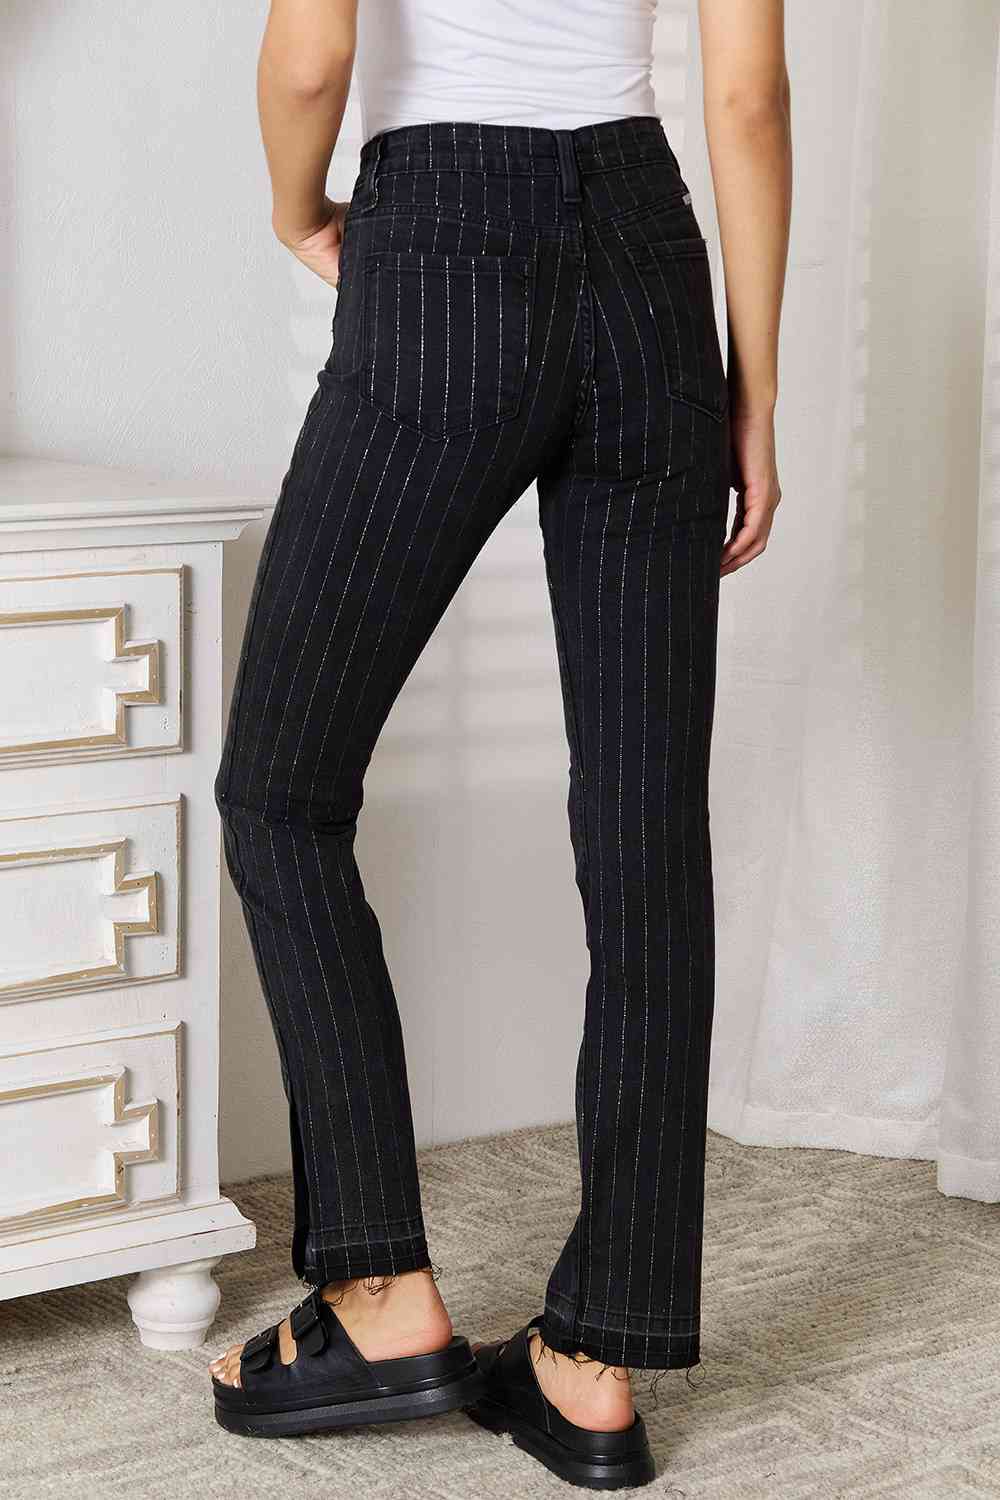 Gussie - Kancan Striped Pants with Pockets